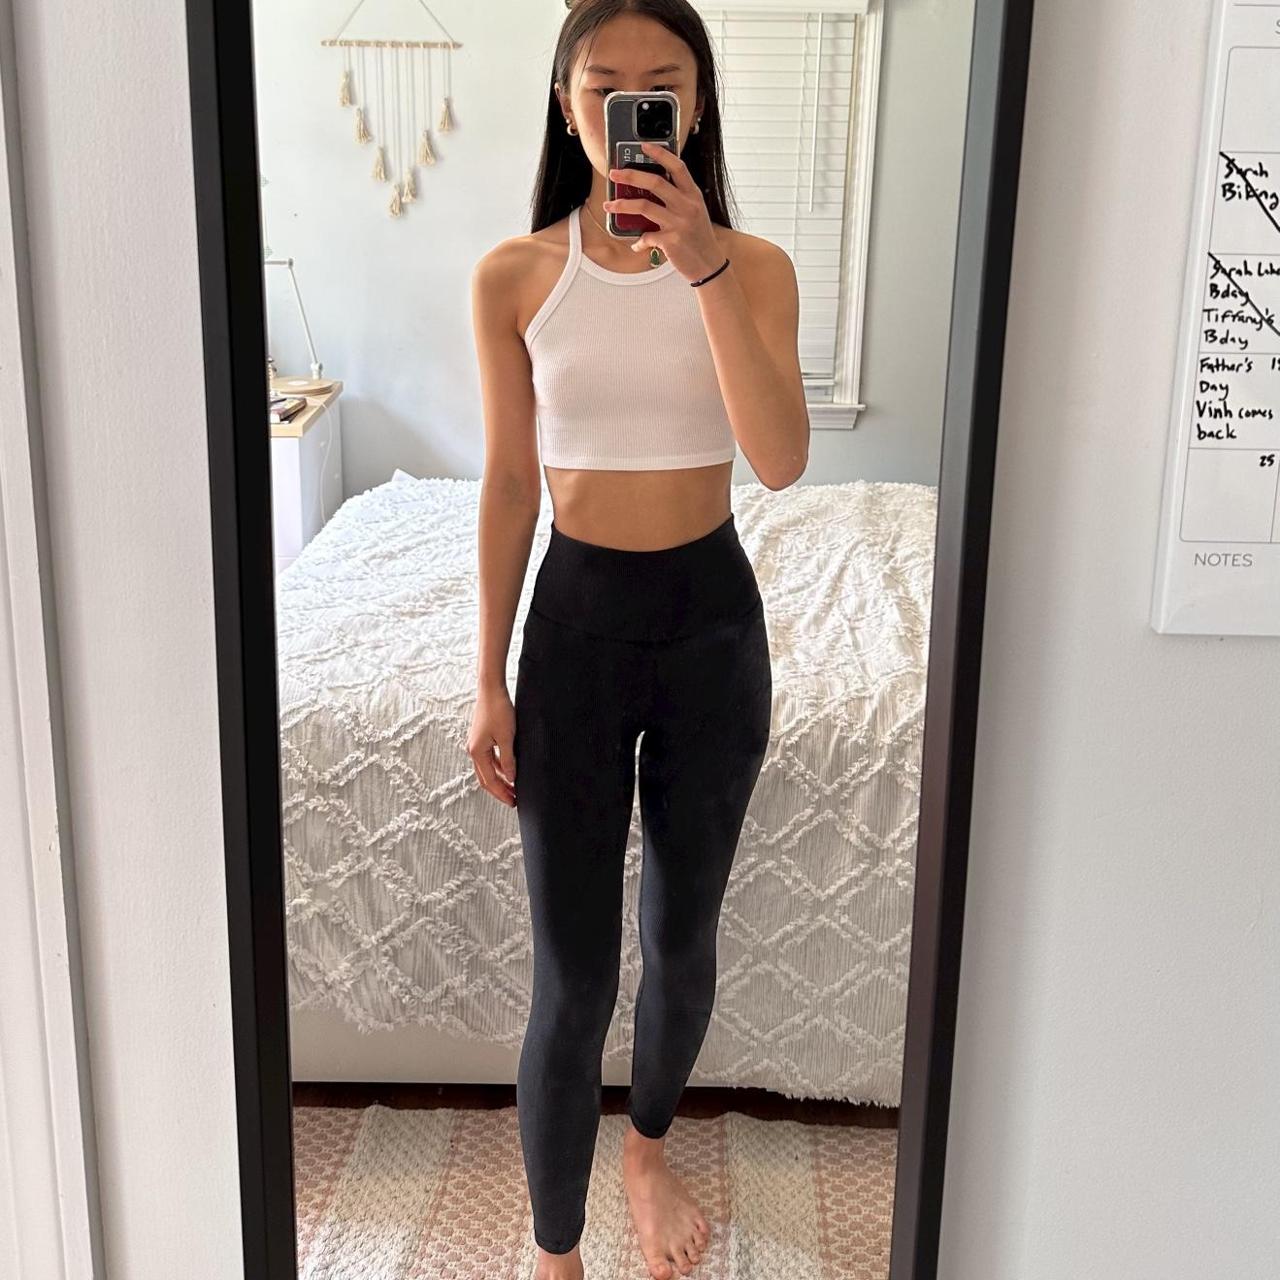 Black Aerie Leggings - Size M (I'm a size 0/2 and - Depop